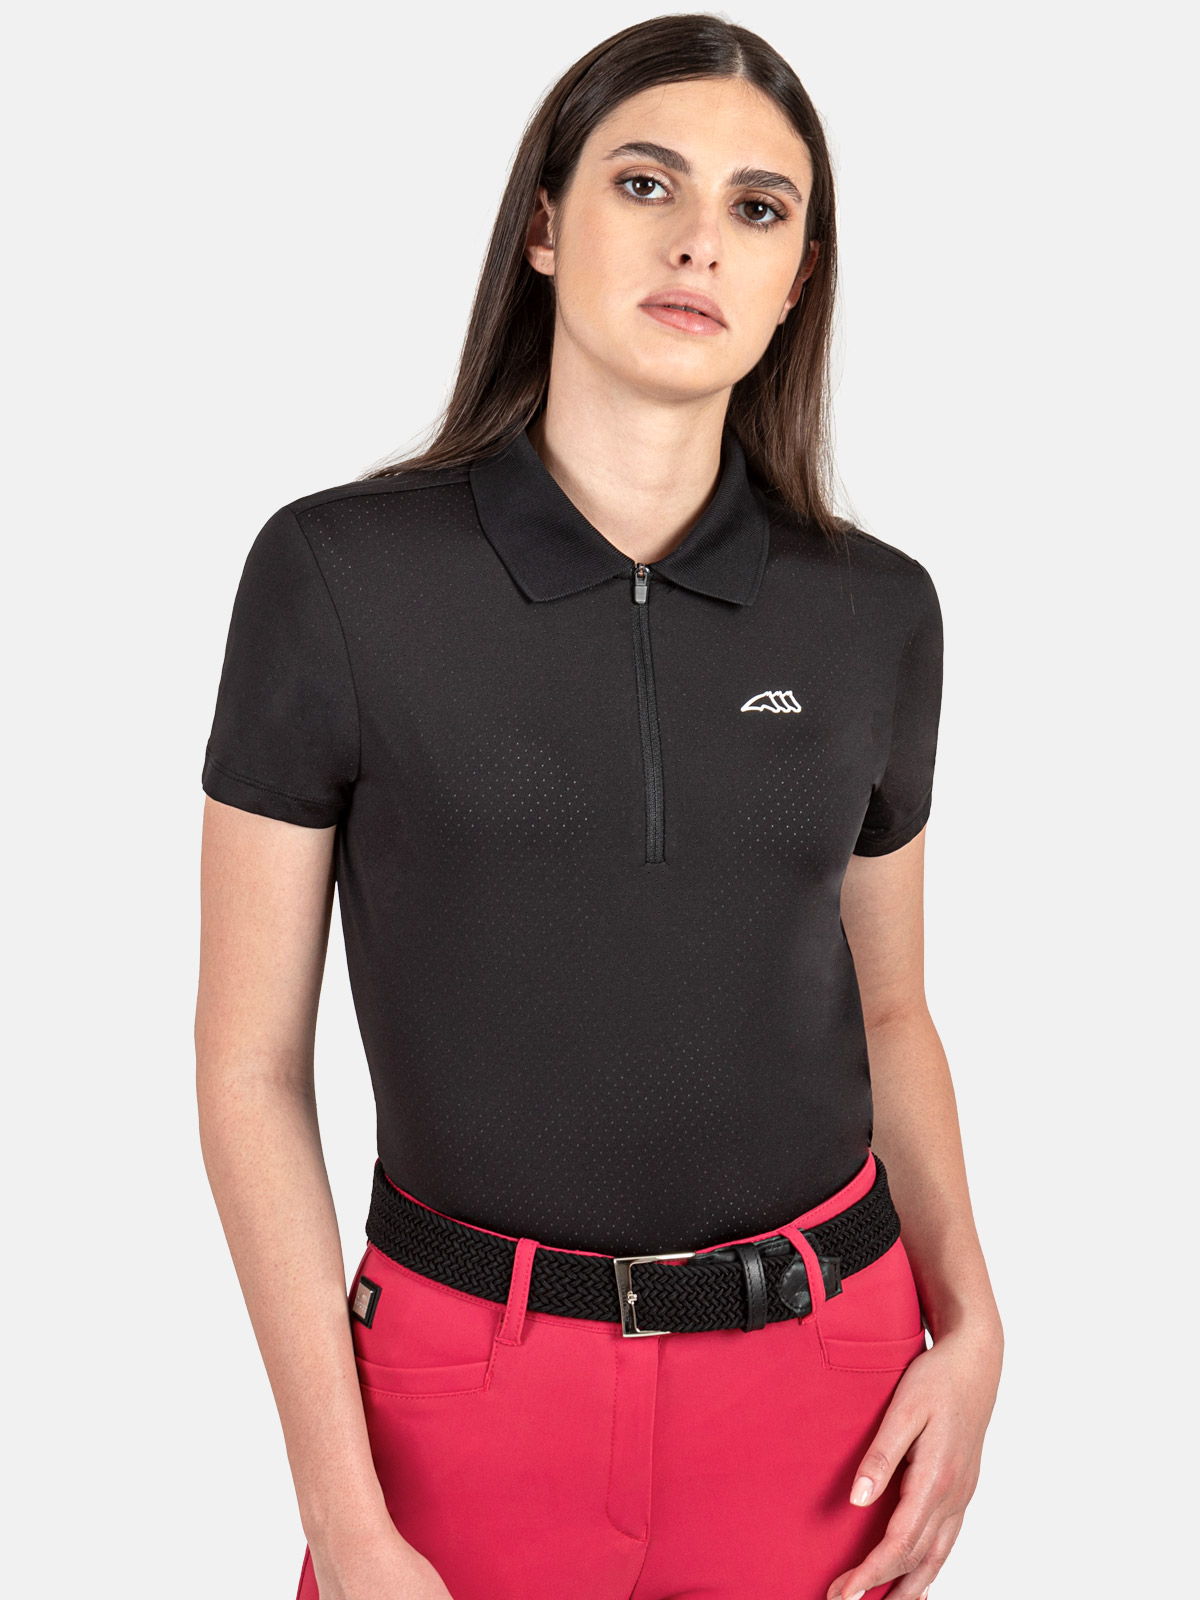 EQUILINE Damen Funktions Polo Shirt Carenc - blue - S - 2